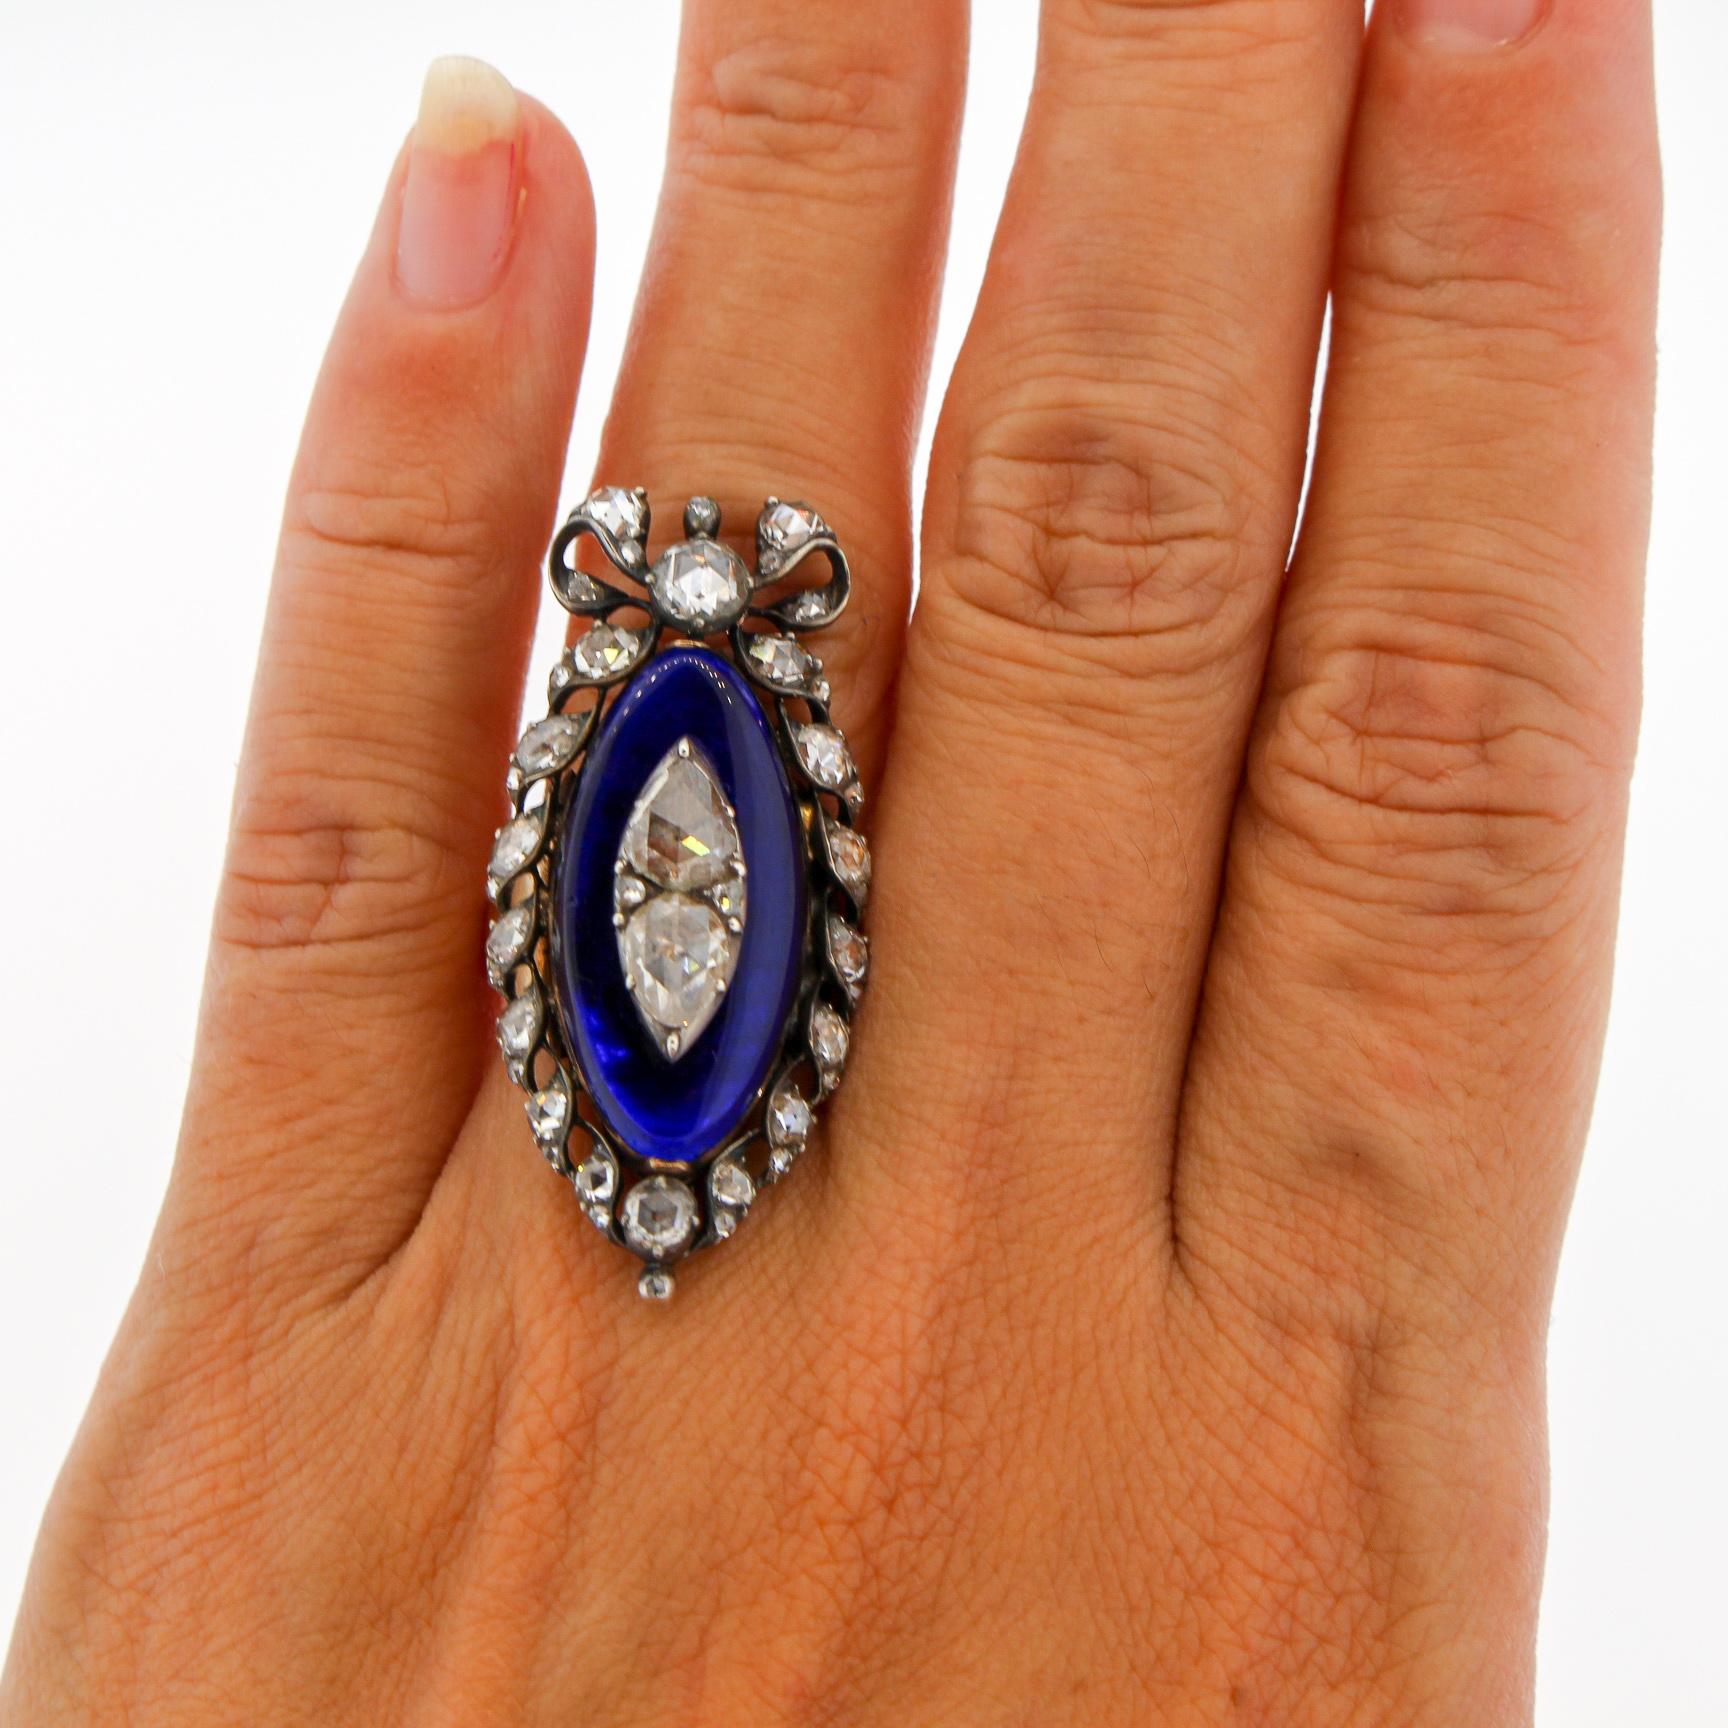 A bold silver and gold blue glass navette shaped rosecut diamond Georgian ring circa 1820. The ring is bright blue glass surrounded by a ribbon of rosecut diamonds and a bow at the top. The ring is set with 43 various shaped rosecut diamonds